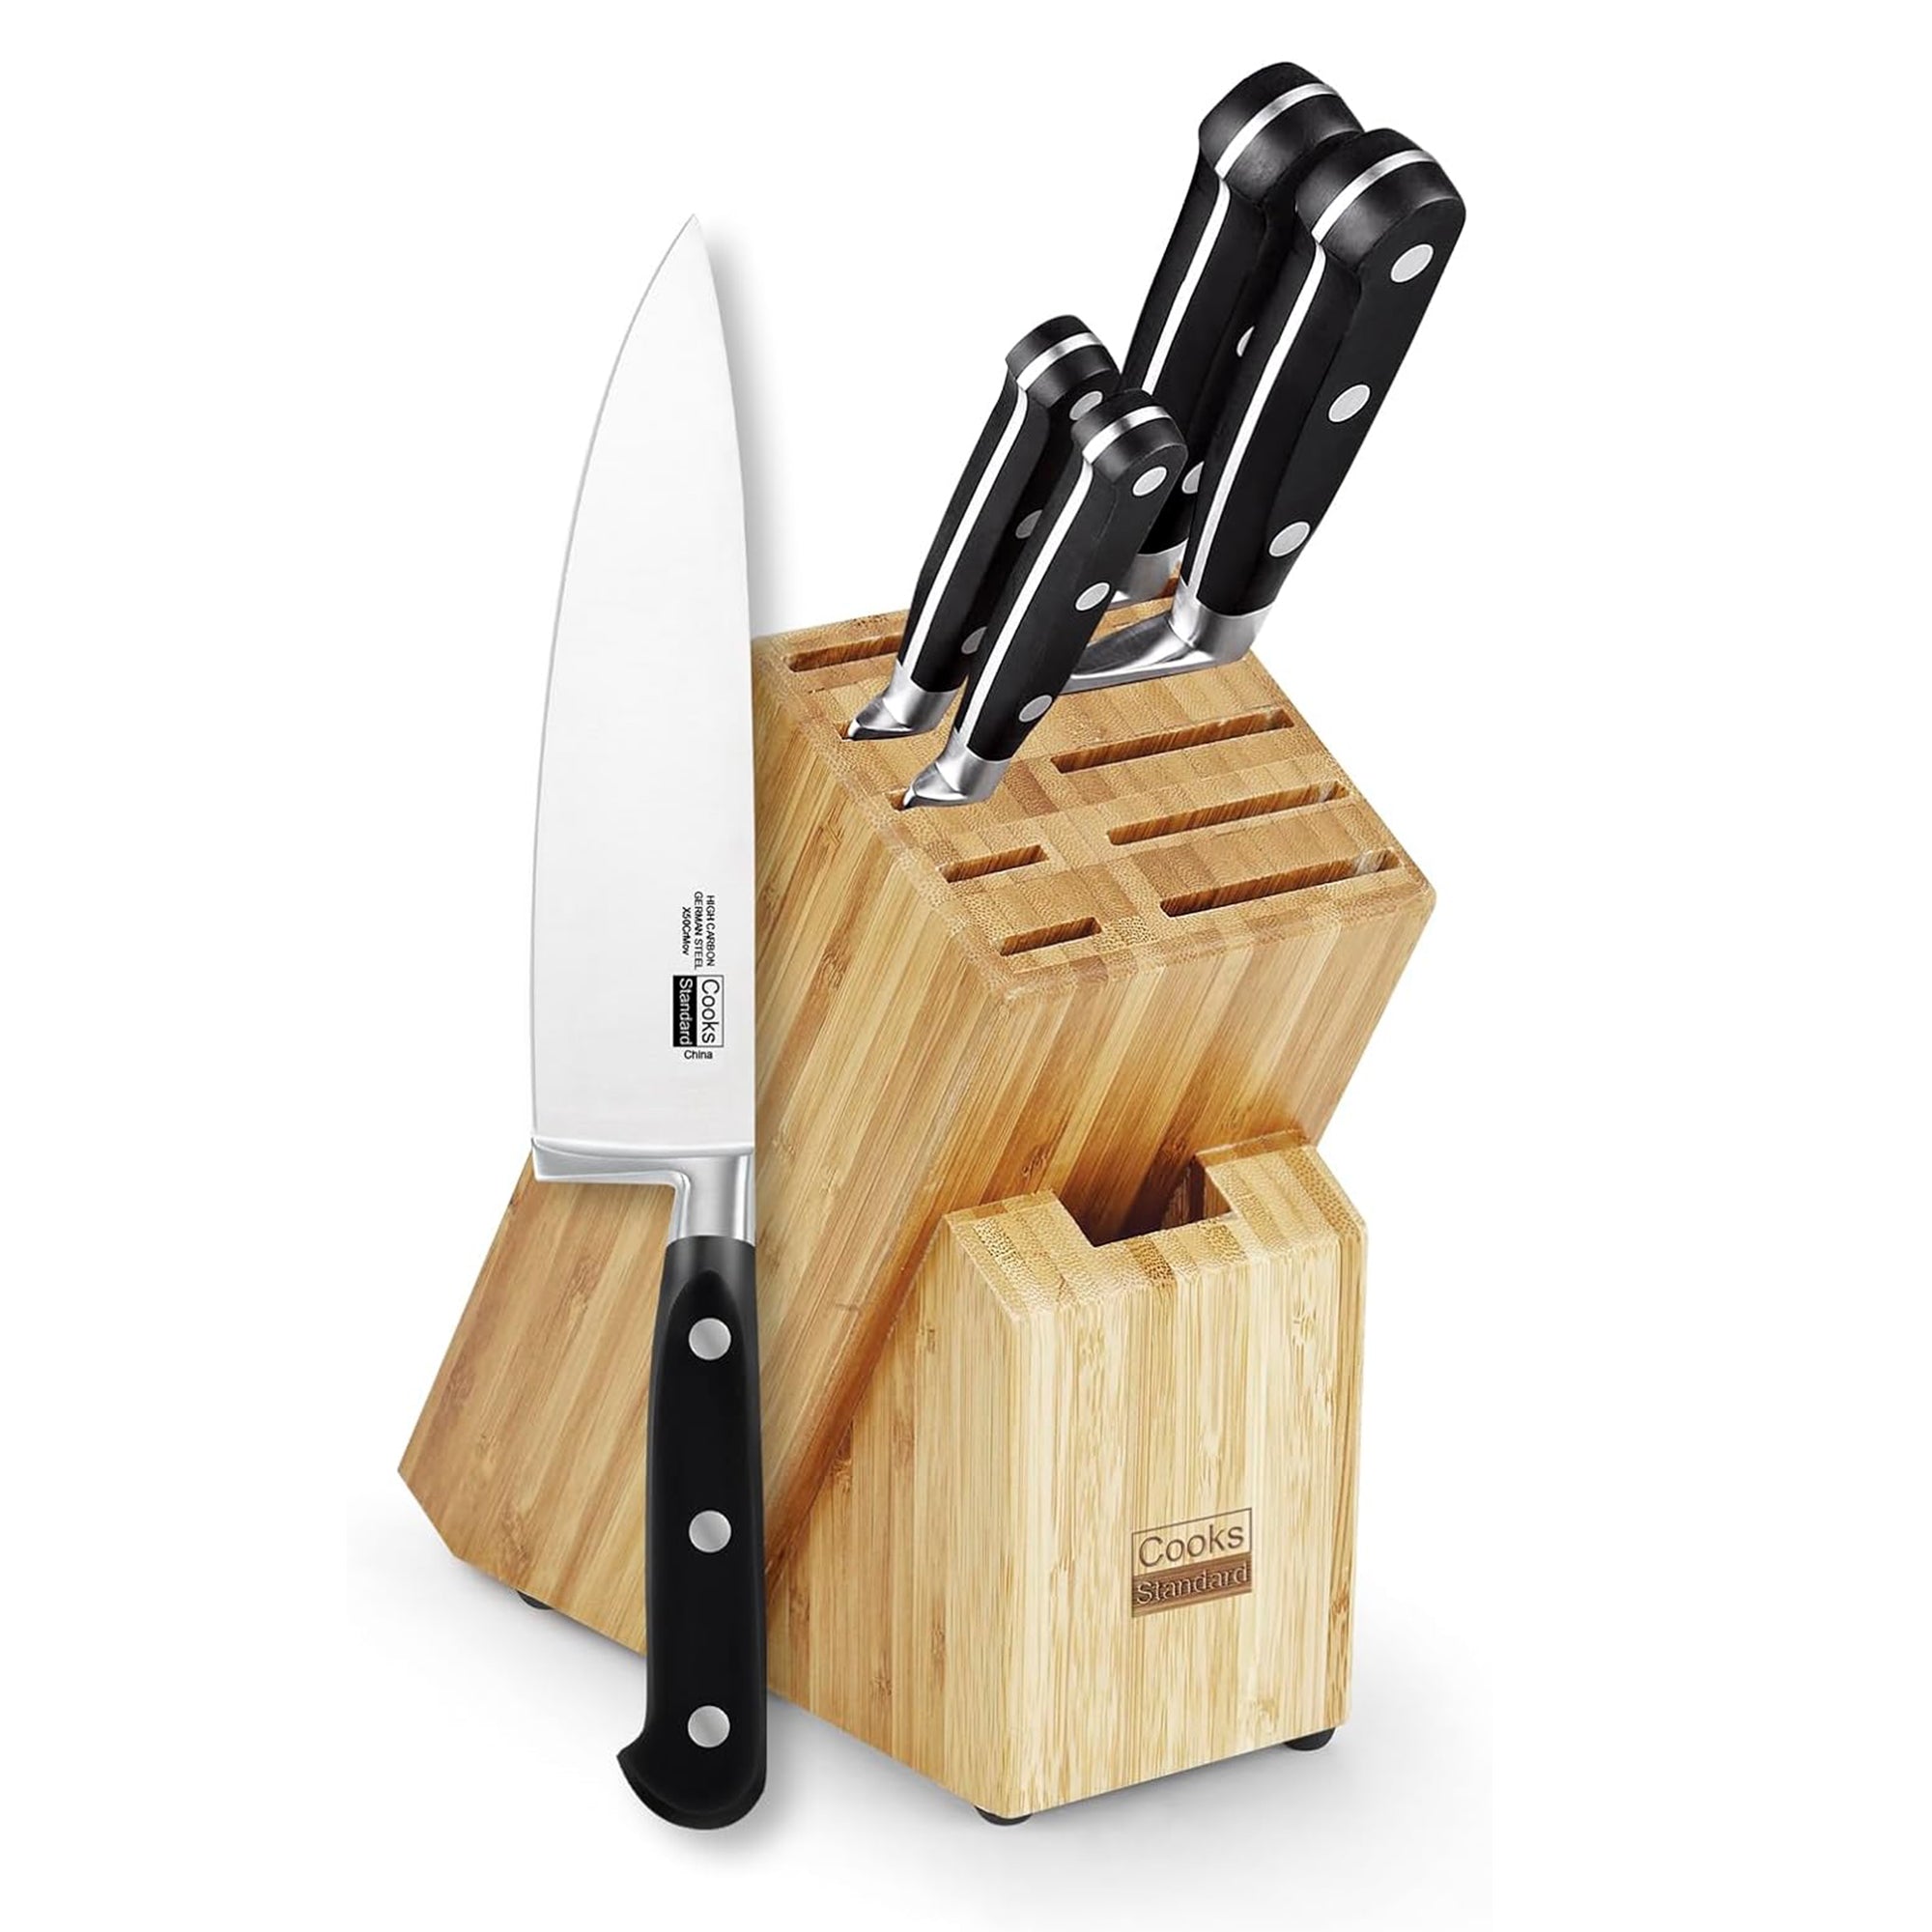 Cook N Home Asian Chef Knife 6pc Set with Bamboo Storage Block